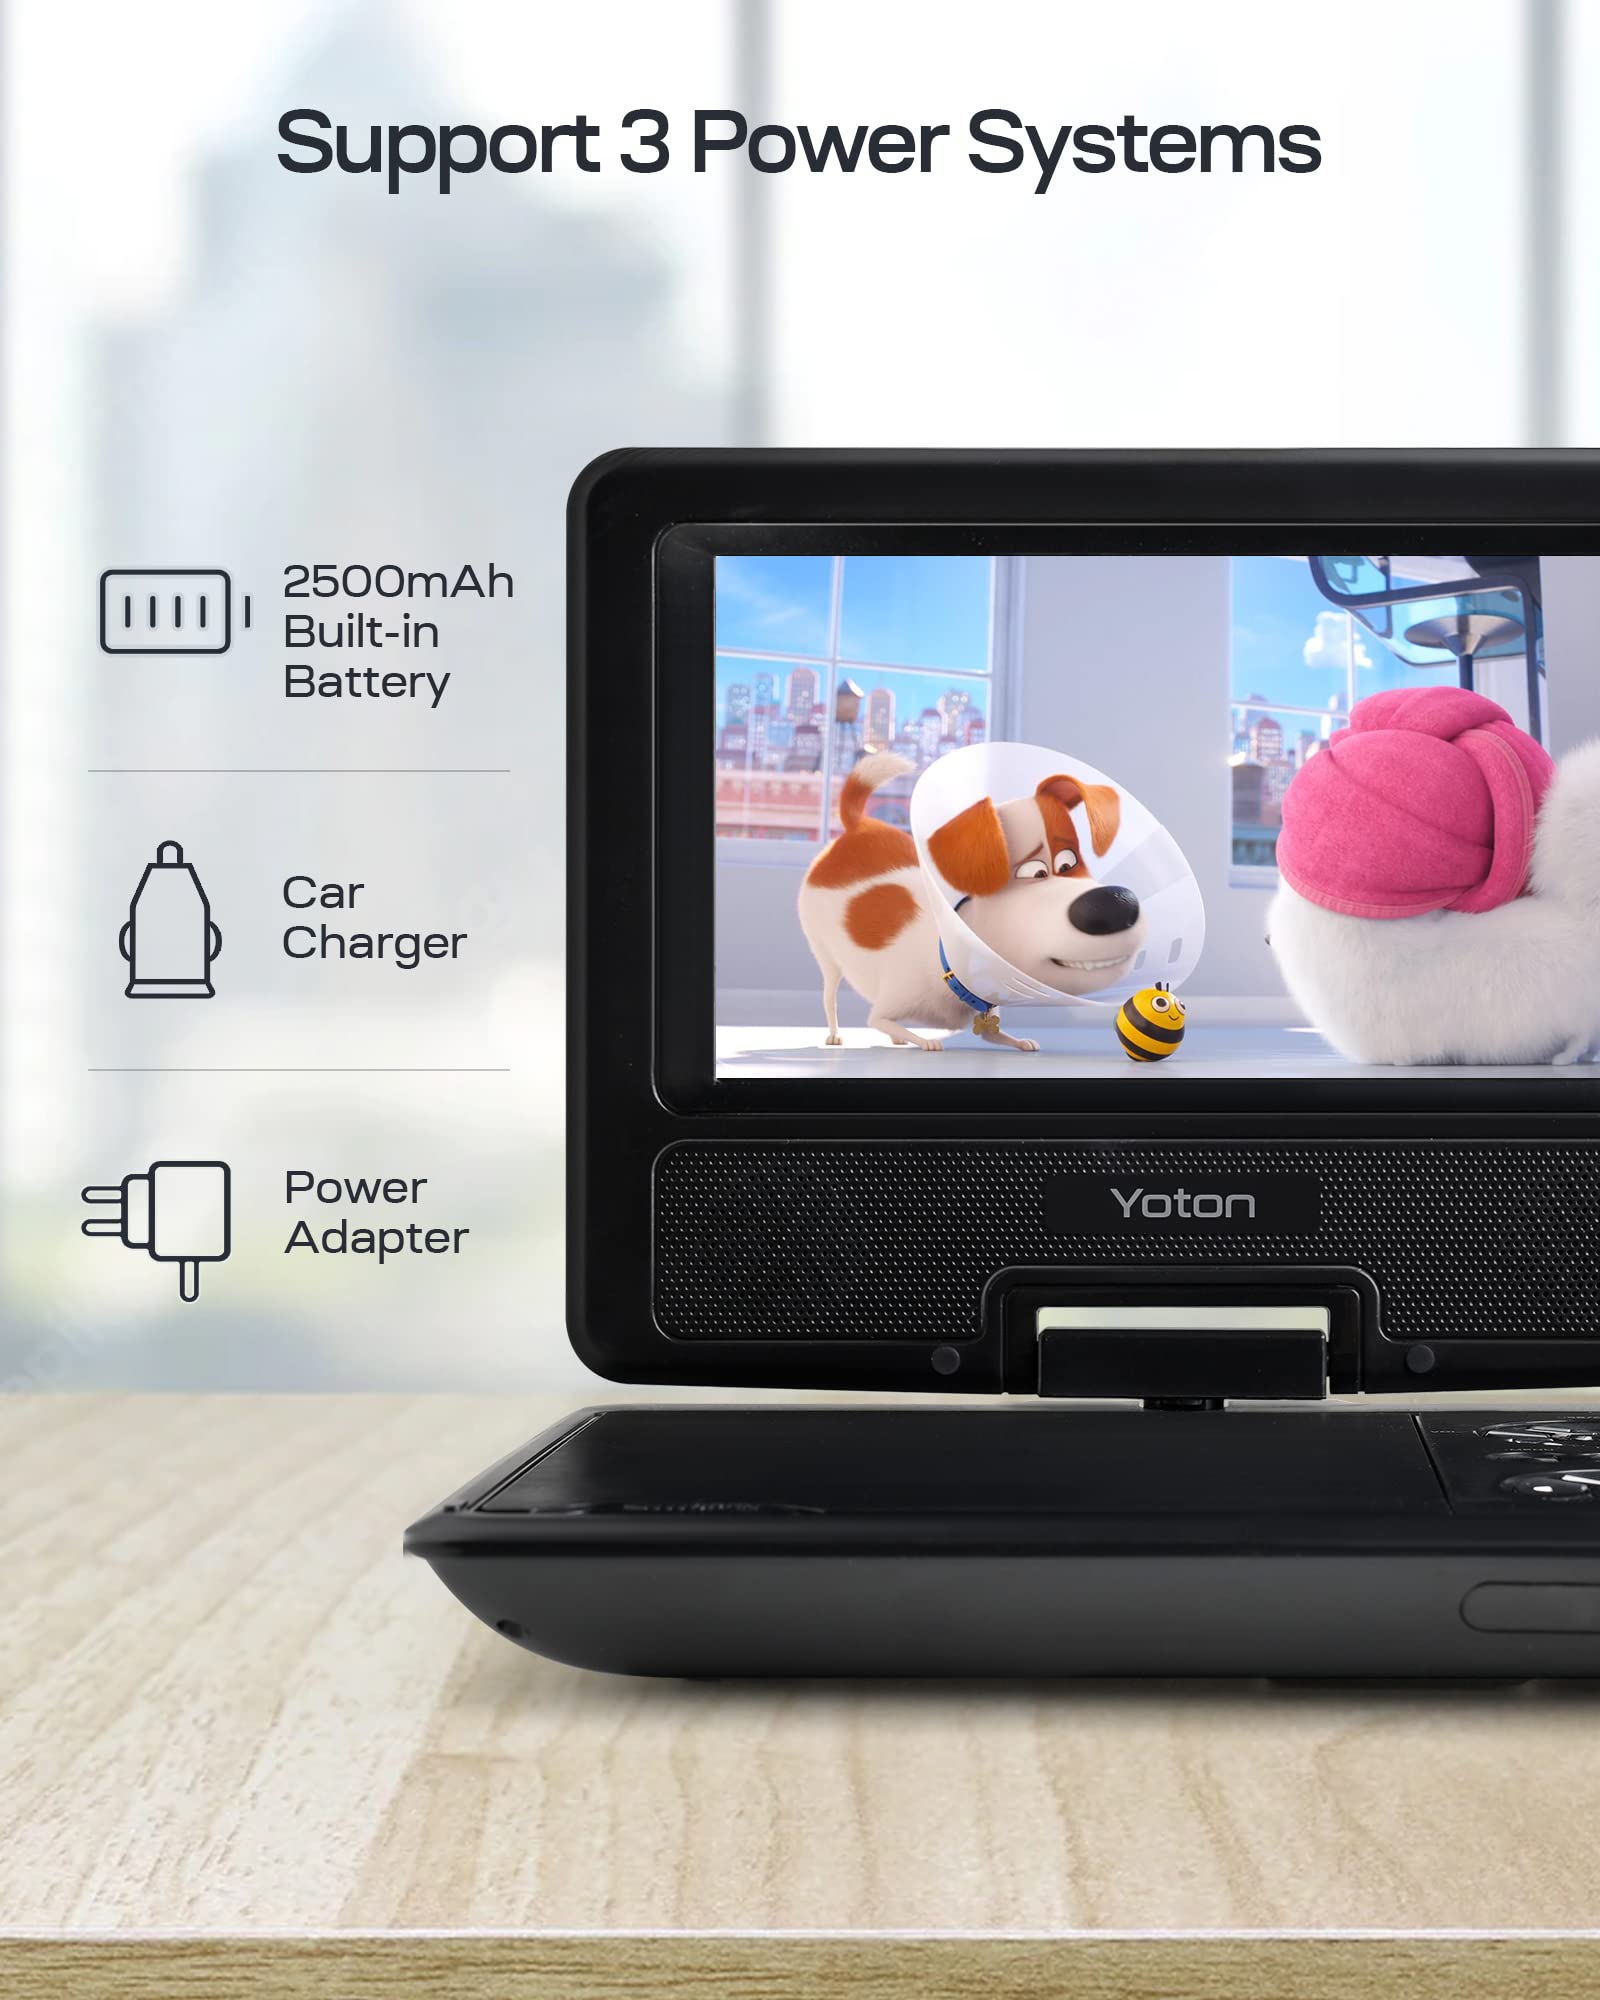 Yoton 9.5" Portable DVD Player for Kids and Car, 7.5" Swivel HD Screen with 4-6 Hours Built-in Battery